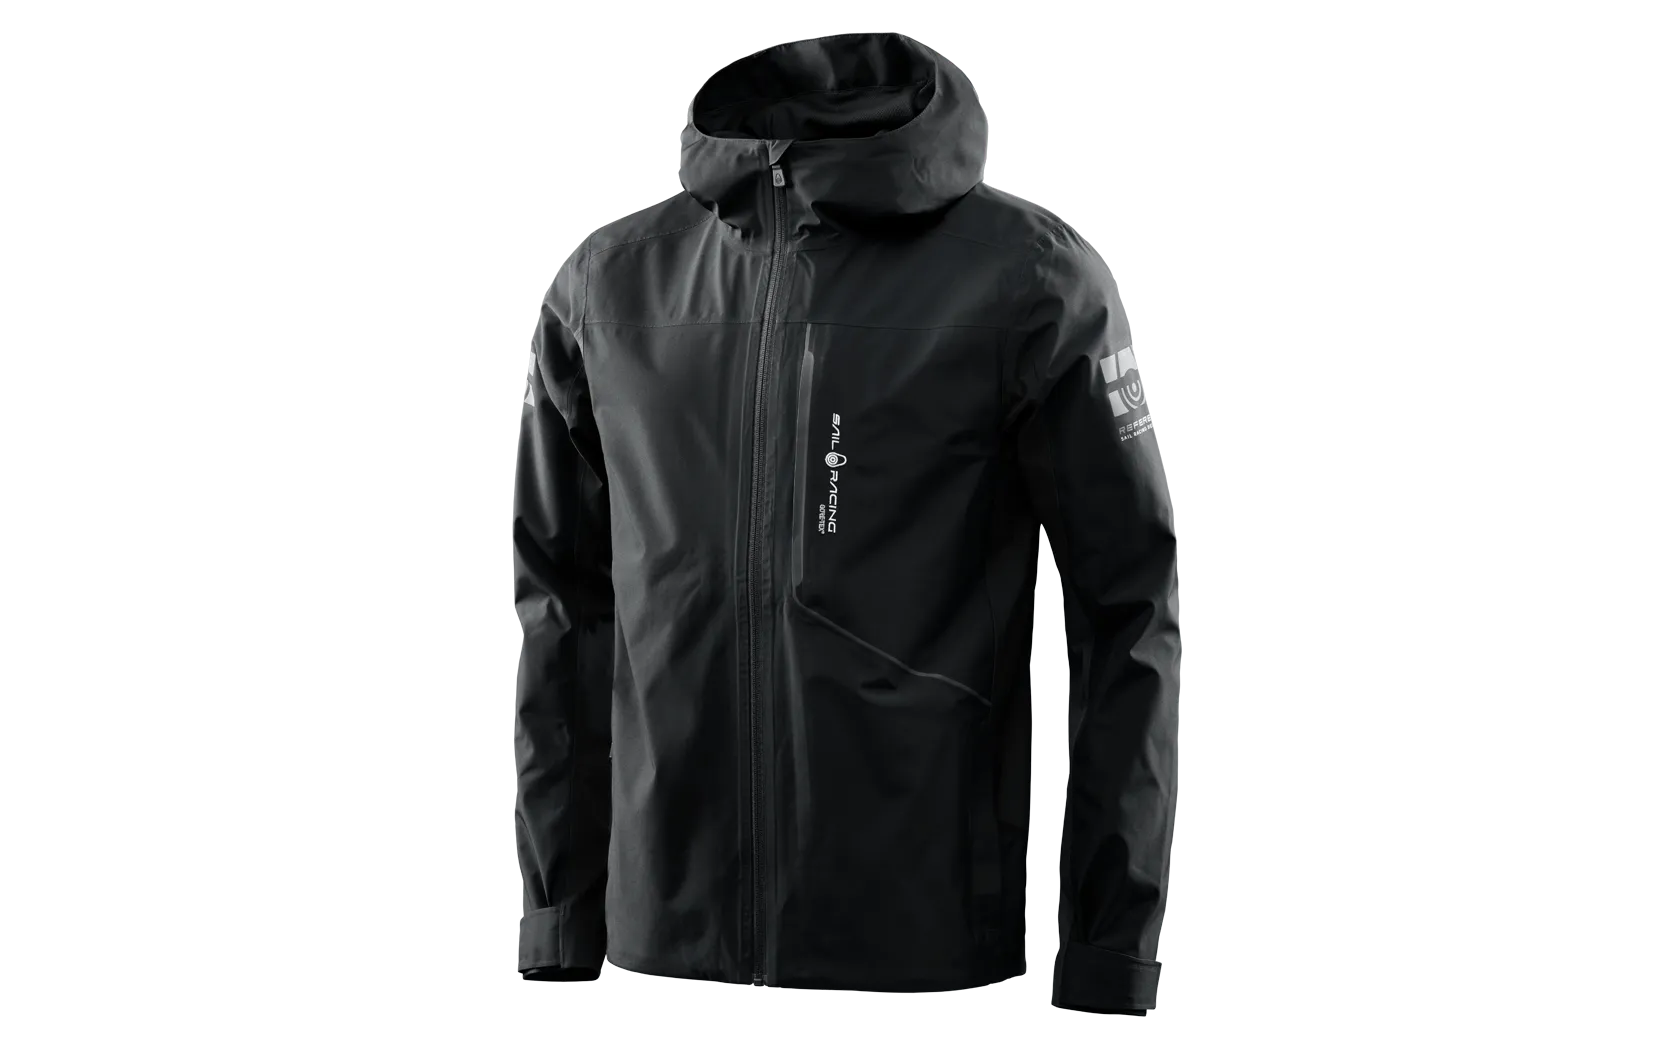 Sail Racing Team Jacket With Gore-tex® Technology